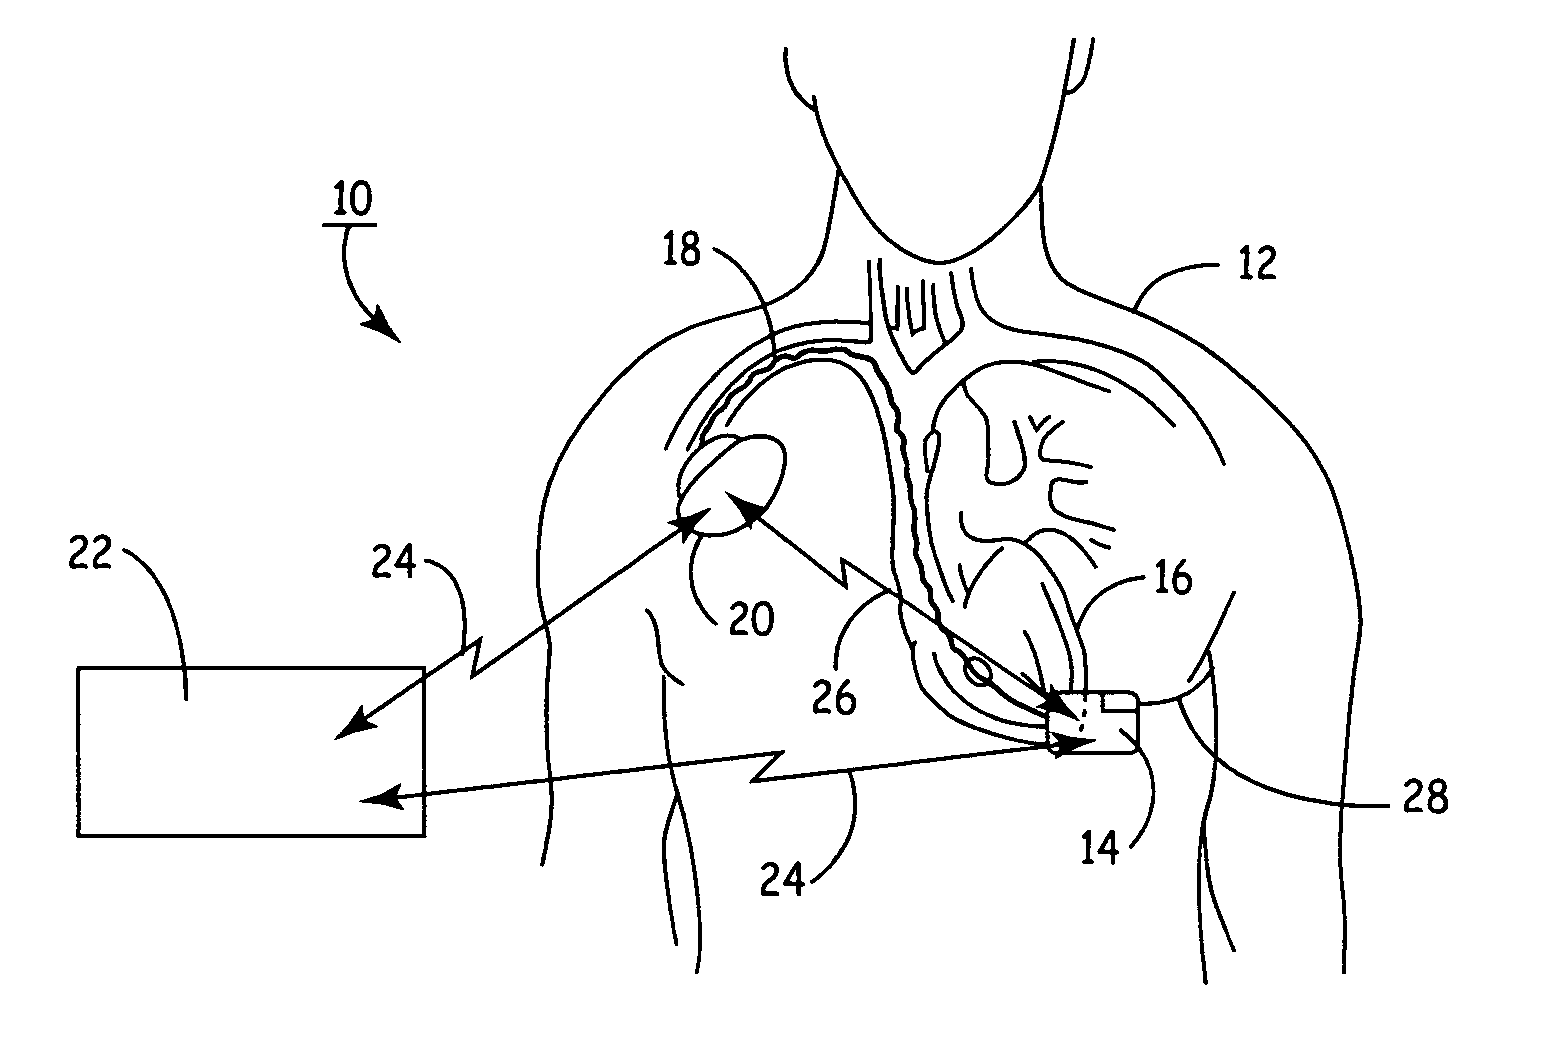 Remotely enabled pacemaker and implantable subcutaneous cardioverter/defibrillator system